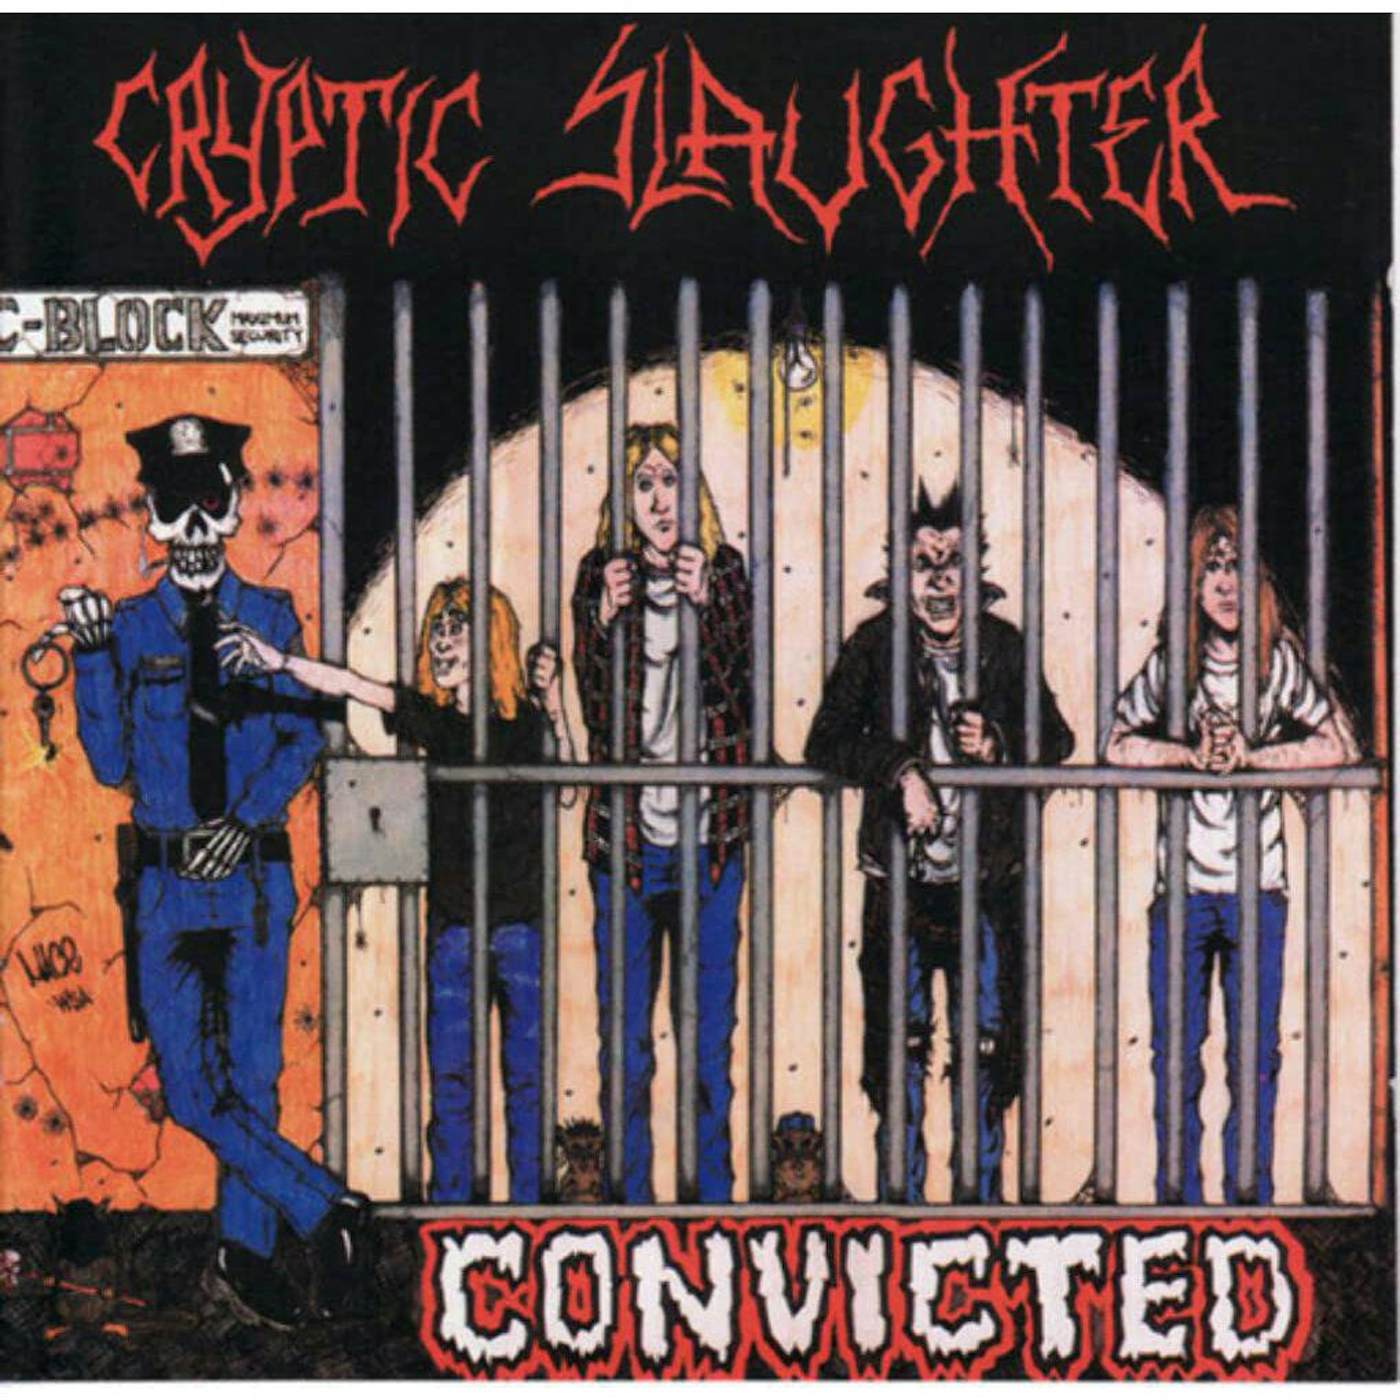 Cryptic Slaughter Convicted Vinyl Record